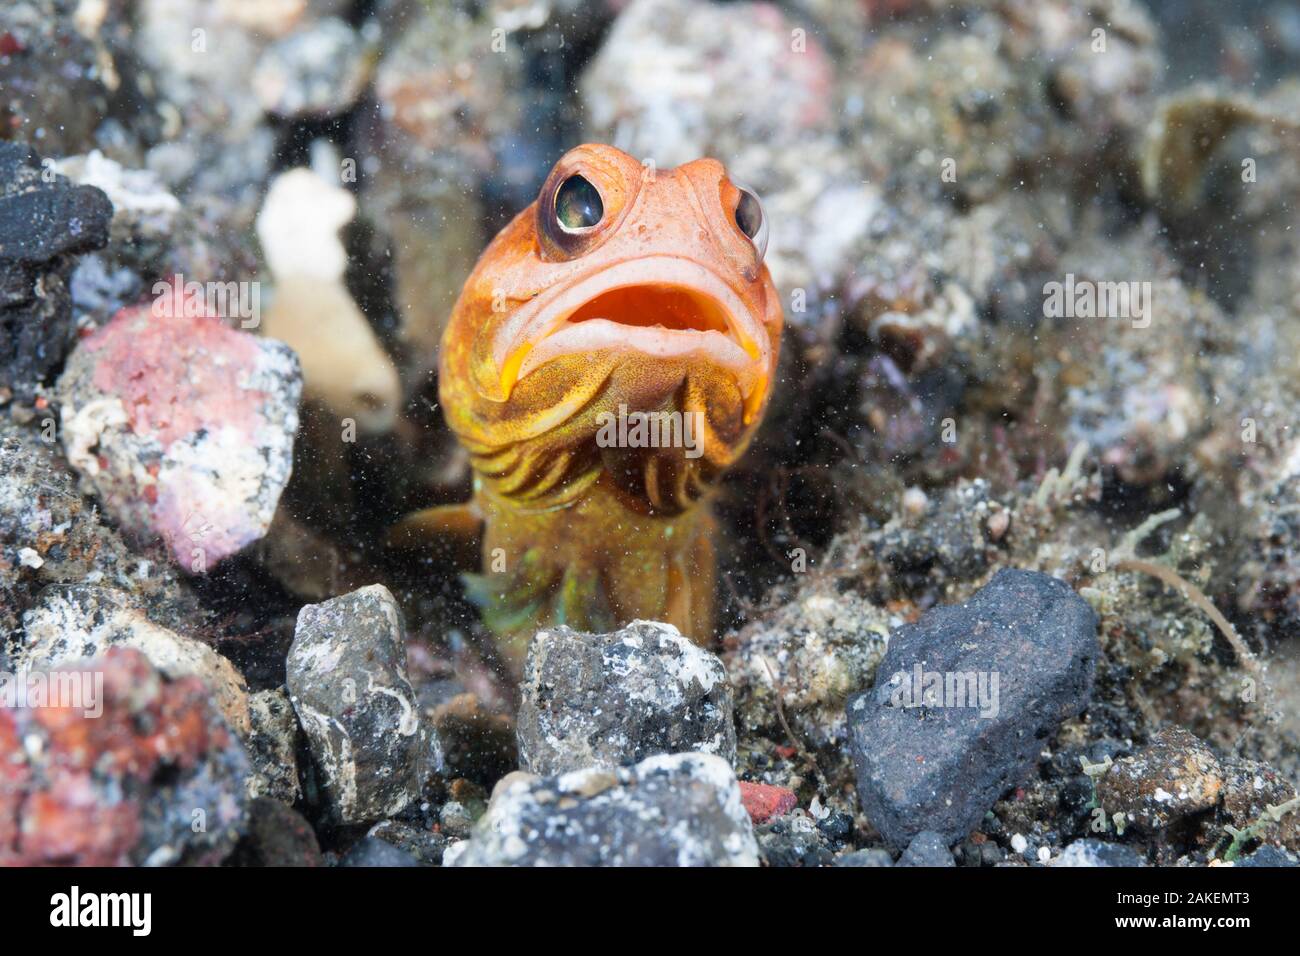 Jawfish (Opistognathus sp) looking around after spitting out sand and rubble to maintain burrow. Lembeh Strait, Celebes Sea, North Sulawesi, Indonesia. Stock Photo